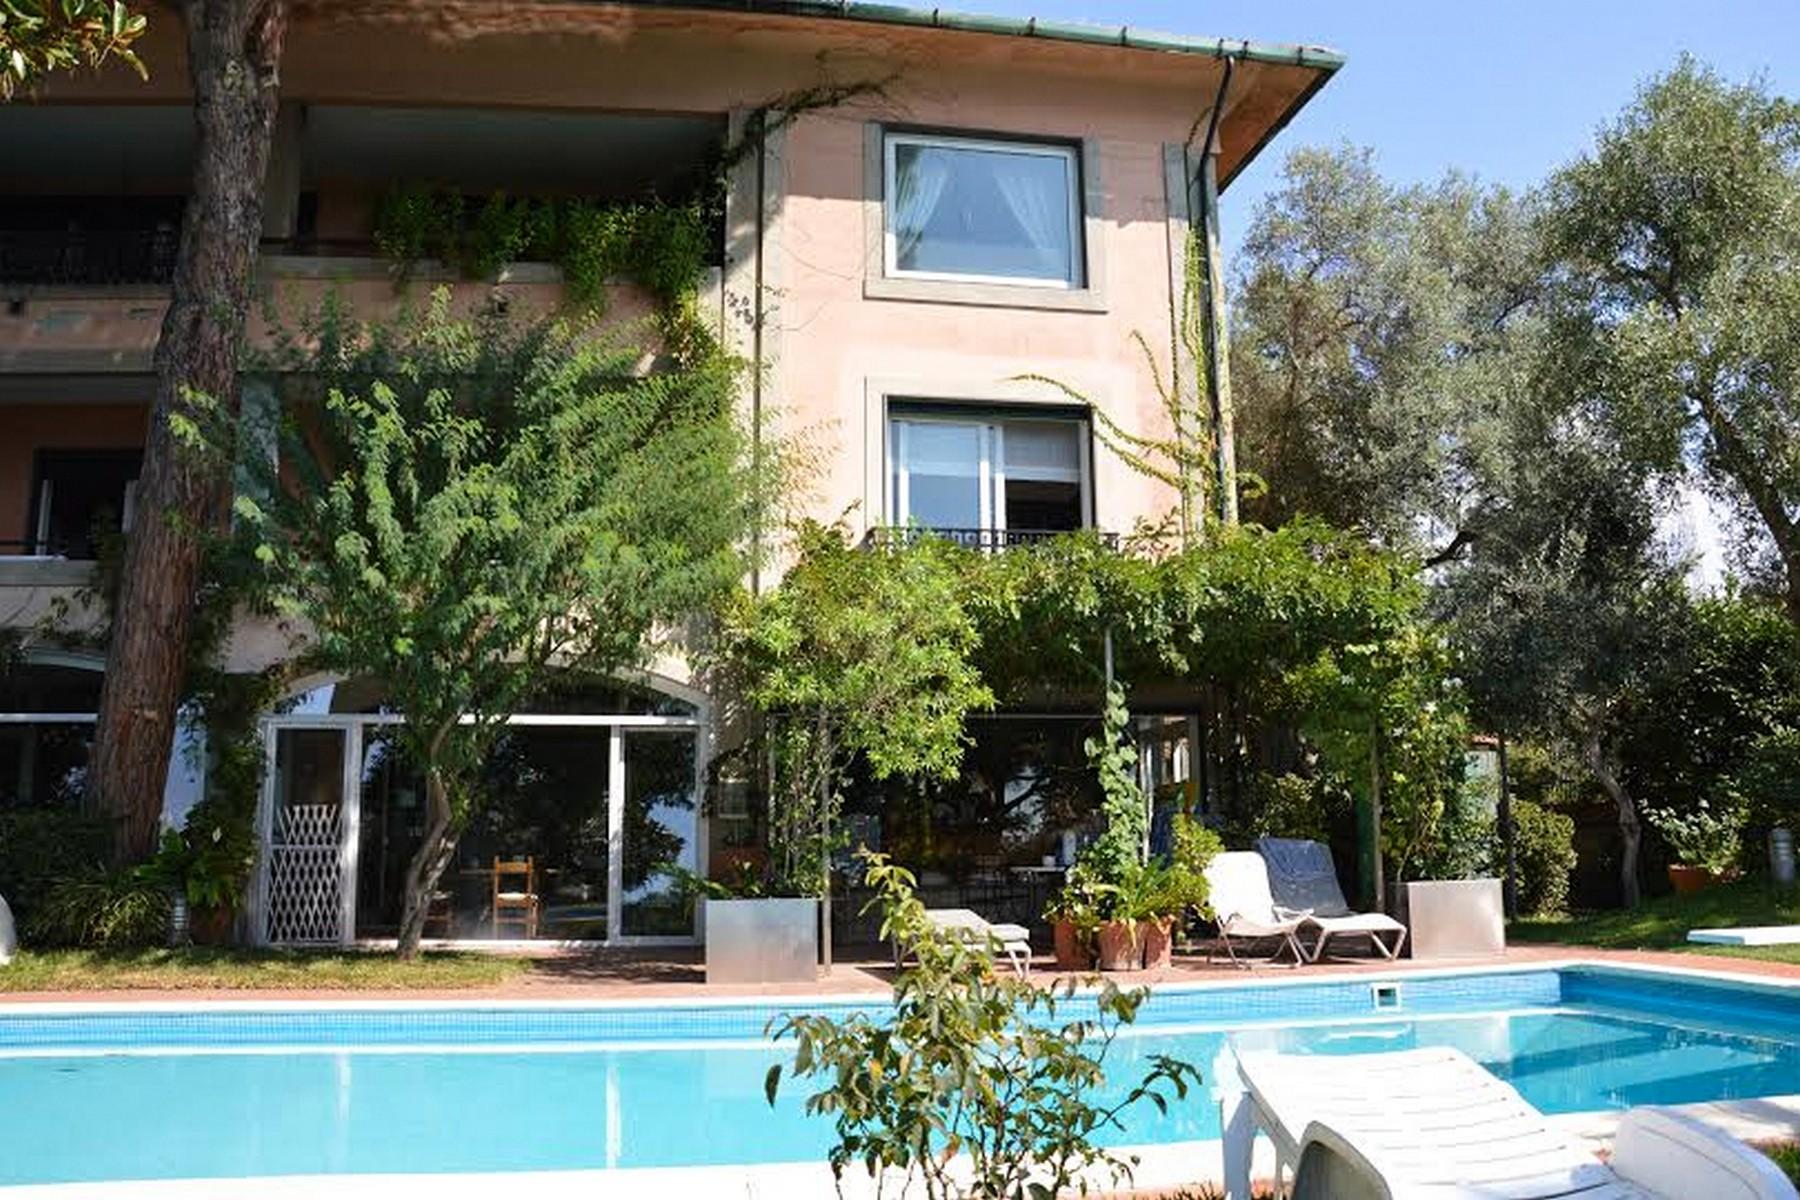 Charming villa with private pool and garden - 20